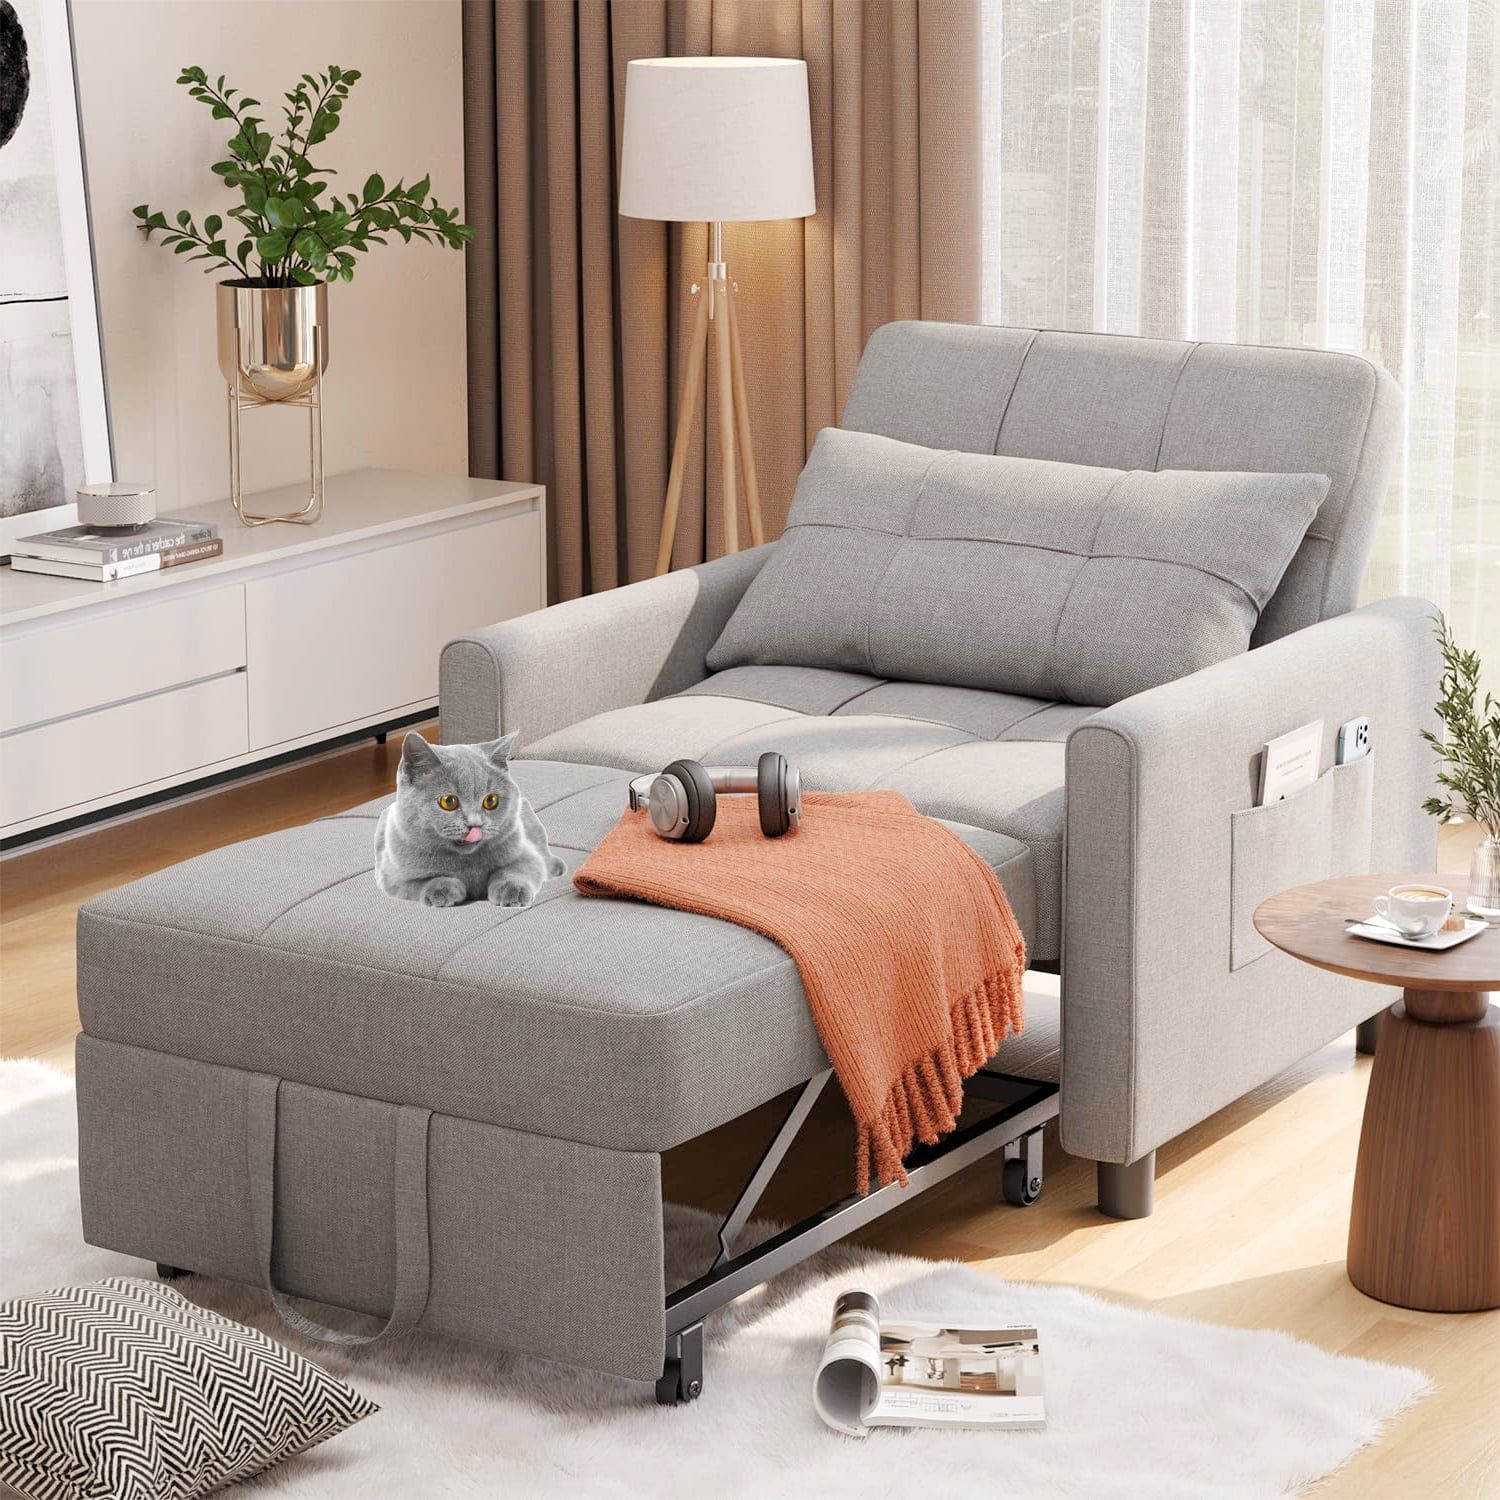 Lofka Sofa Bed, Convertible Chair Bed 3 In 1 Single Couch Bed, Light Gray –  Walmart Regarding Convertible Light Gray Chair Beds (Photo 2 of 15)